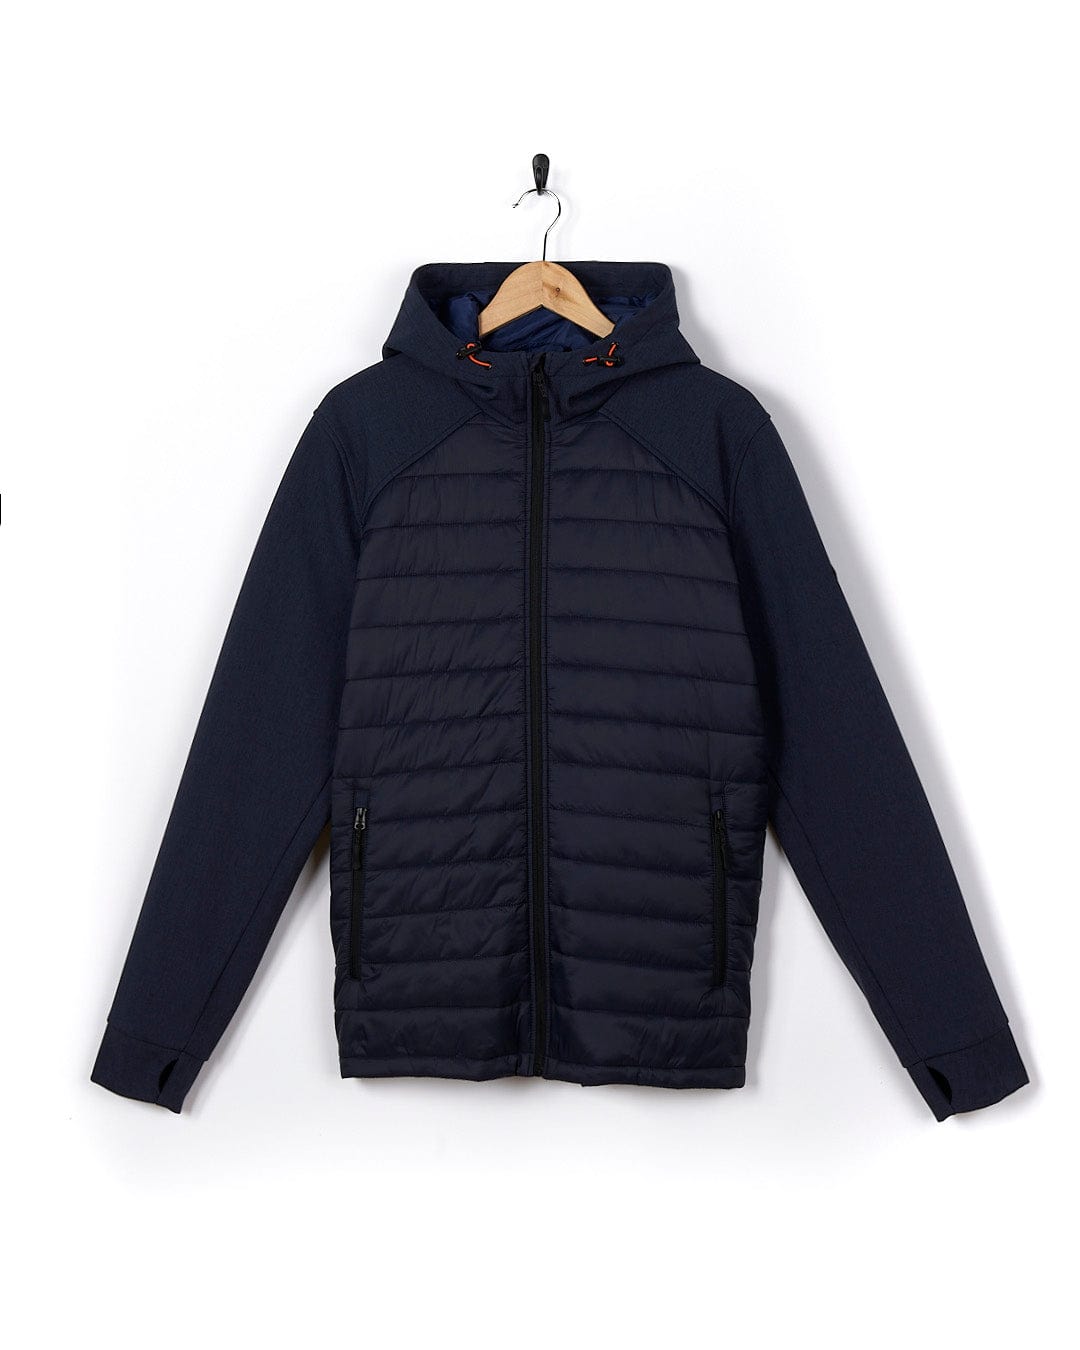 A Saltrock men's Purbeck Padded Jacket hanging on a hanger.